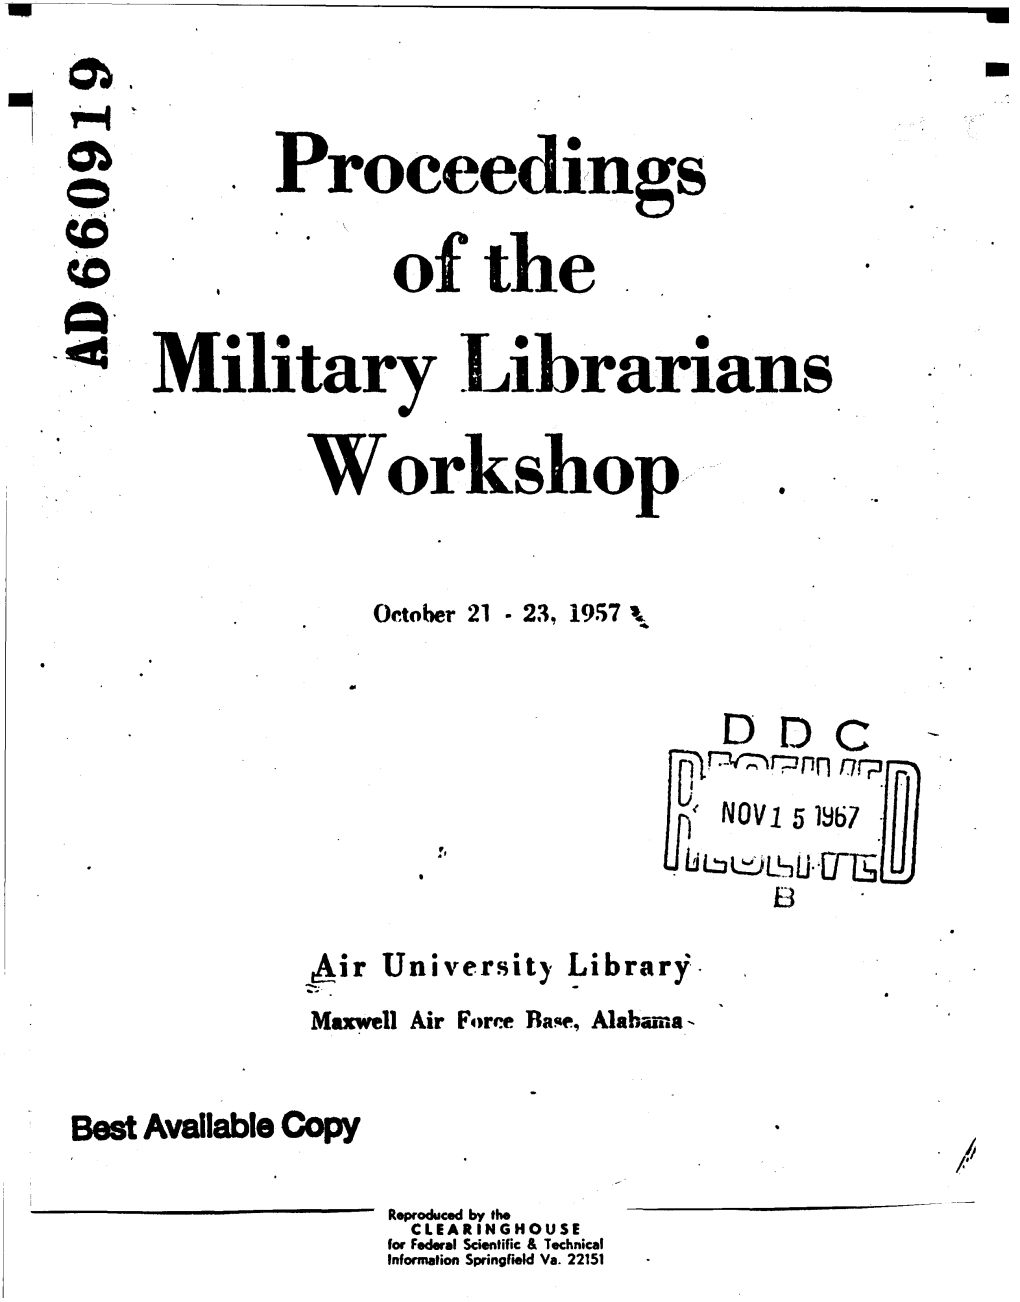 Proceedings of the Military Librarians Workshop